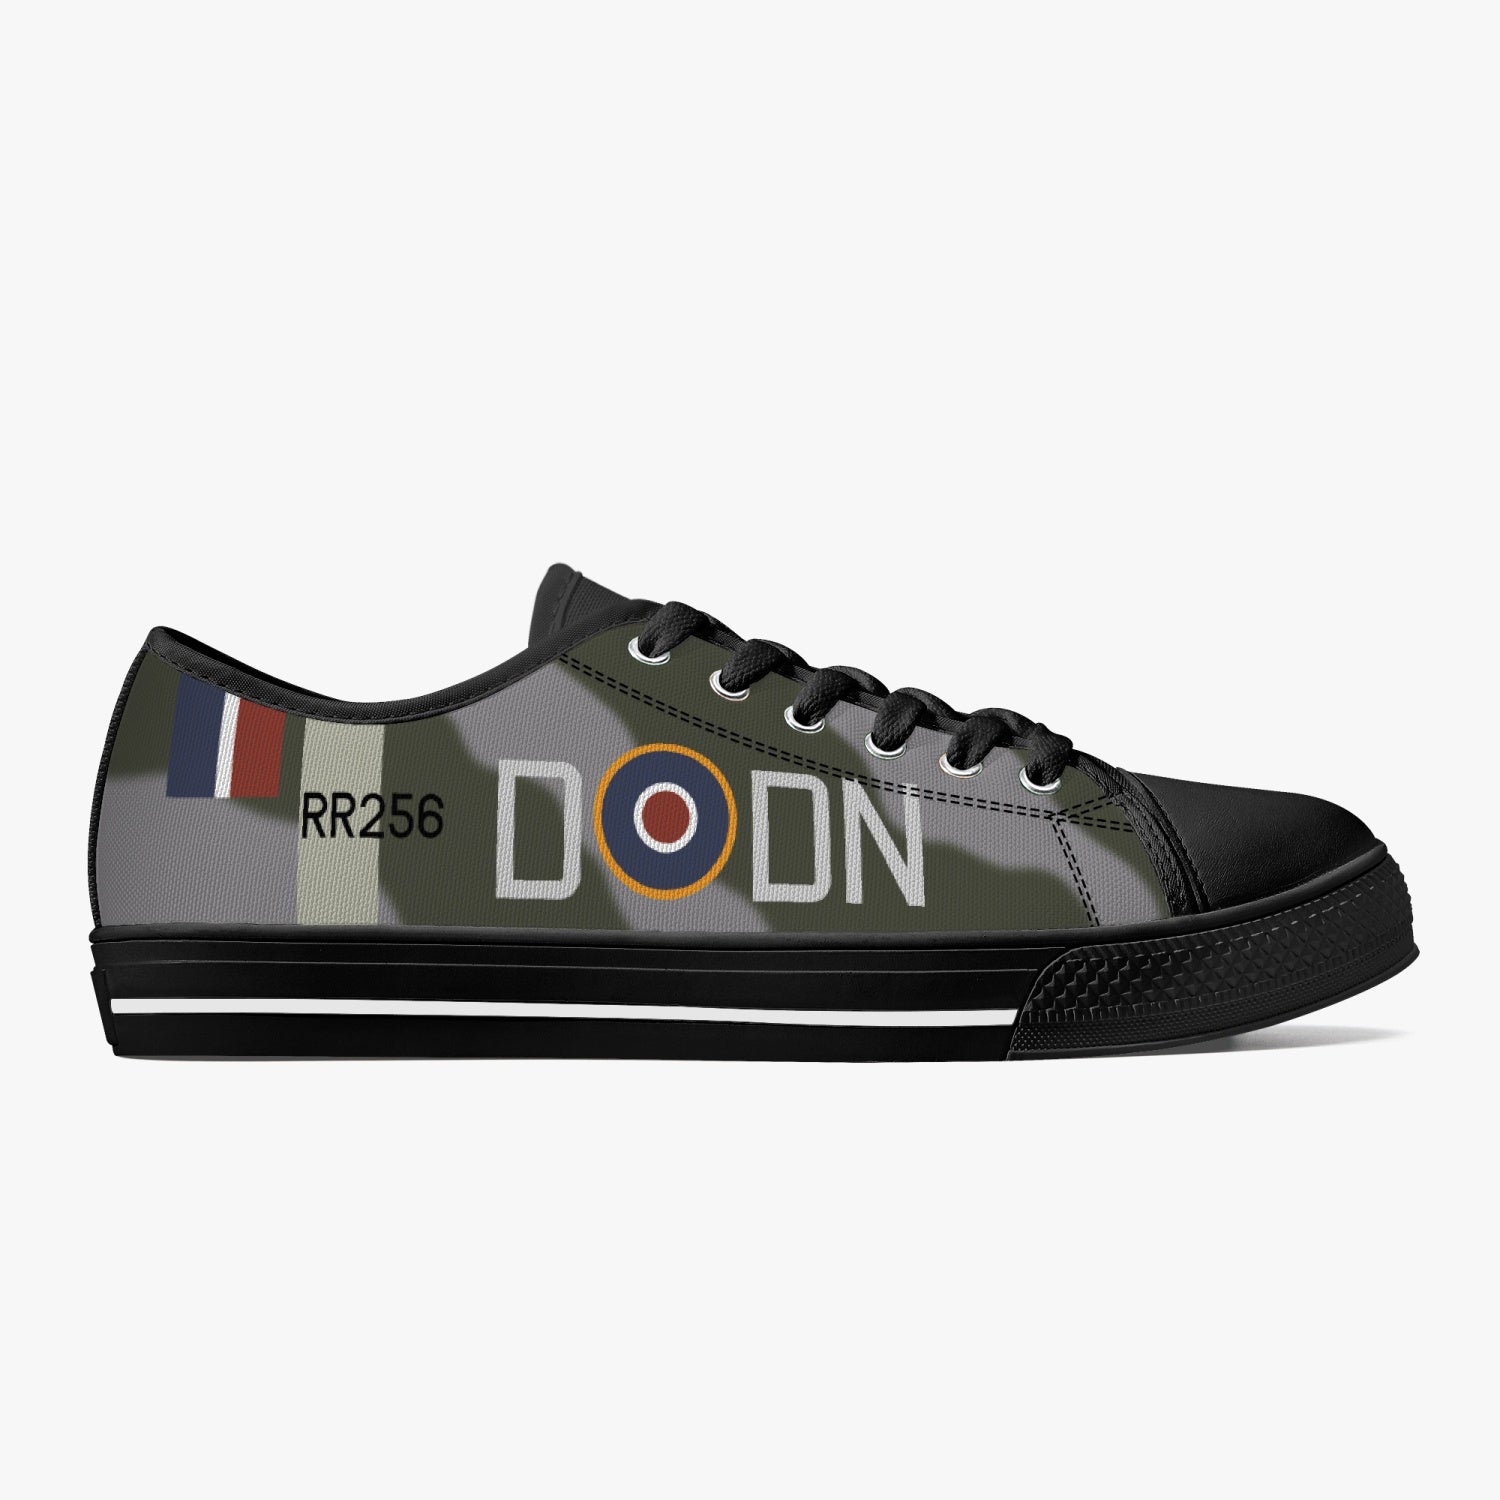 Fighter Command "DN-D" (RR256) Low Top Canvas Shoes